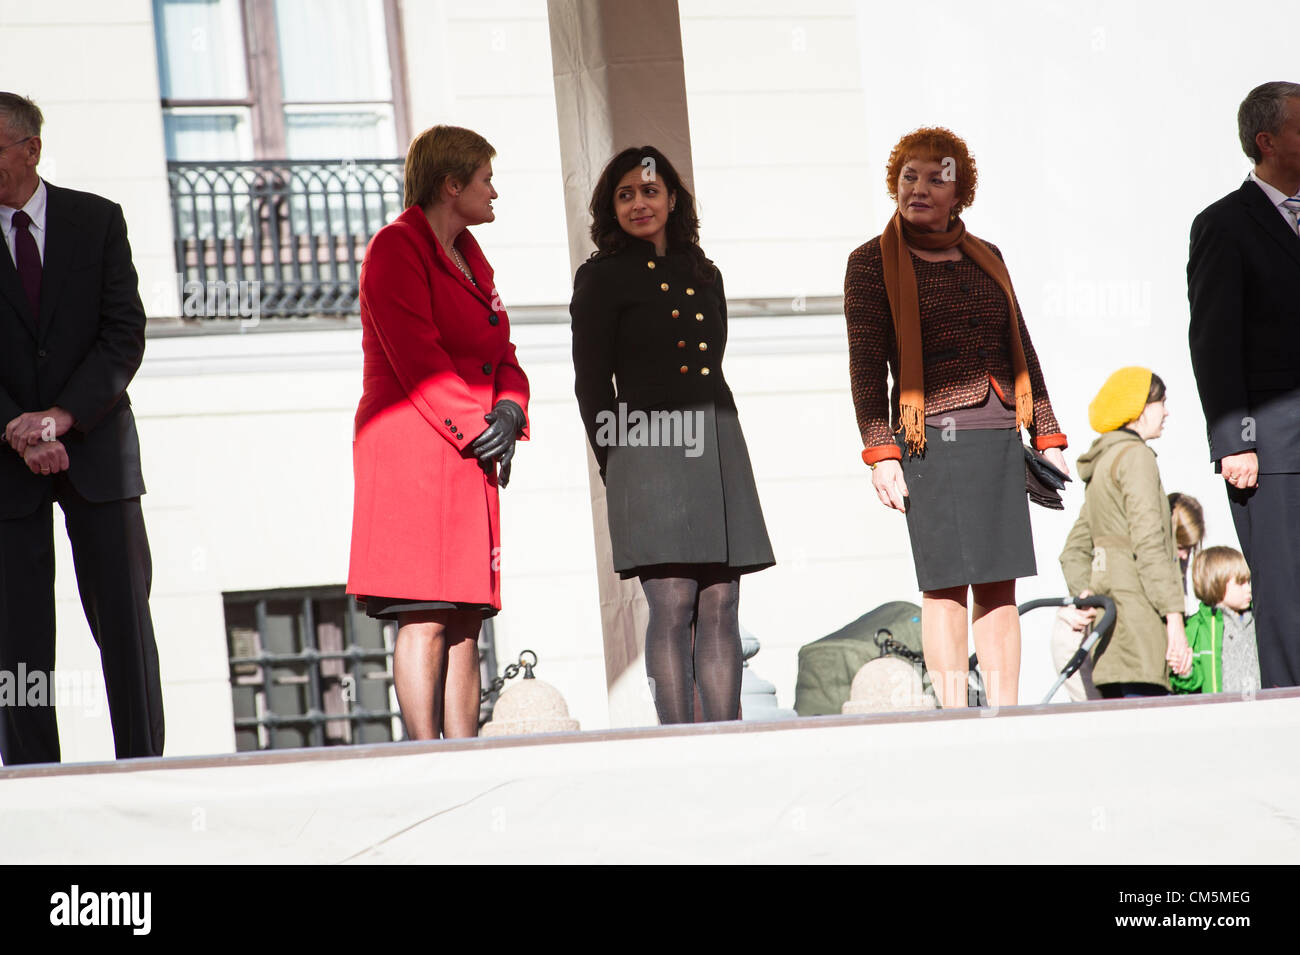 Oslo, Norway. 10/10/2012. Minister of culture Hadia Tajik (middle) seen waiting for the Finnish President outside the castle. Hadia is the first muslim minister in Norway. Stock Photo